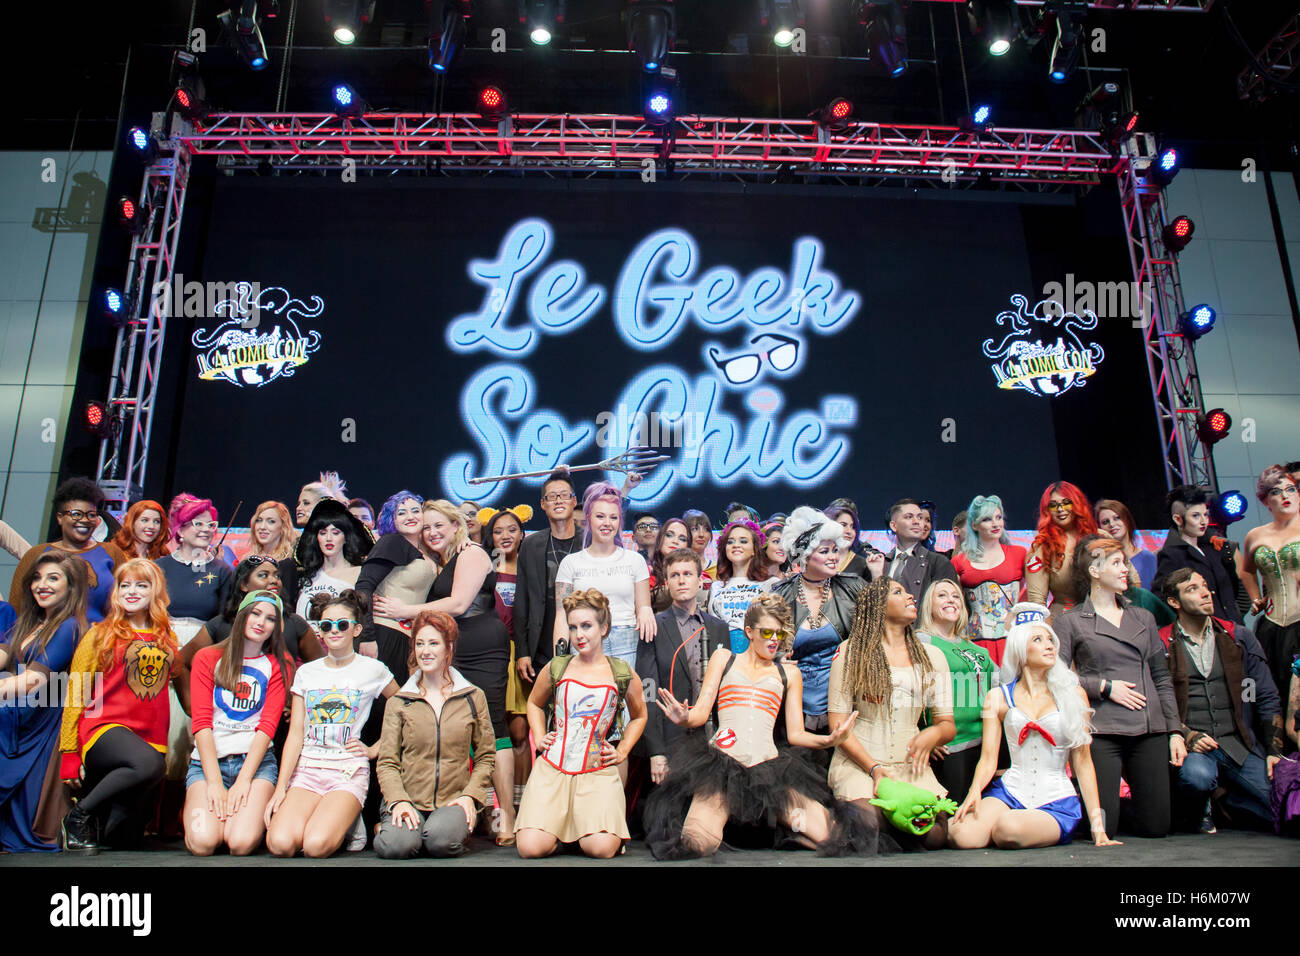 STAN LEE LA COMIC CON: October 29, 2016 Los Angeles, California. The models and designers at the Le Geek So Chic fashion show. Stock Photo